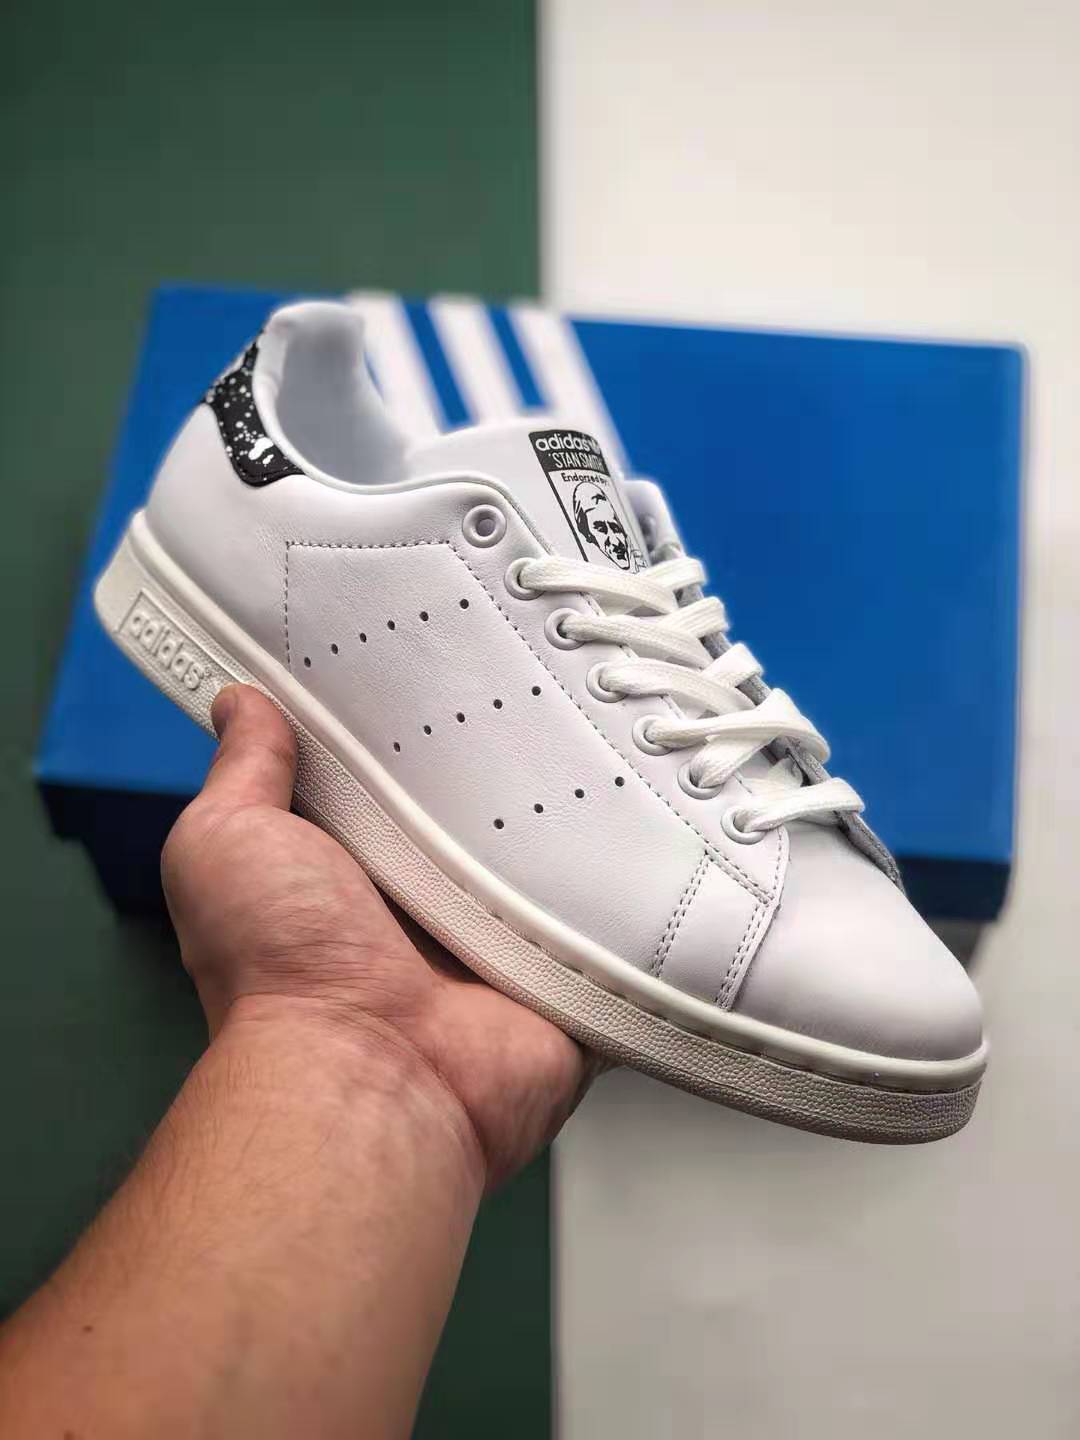 Adidas Stan Smith BZ0408 - Classic White Sneakers with Green Accents